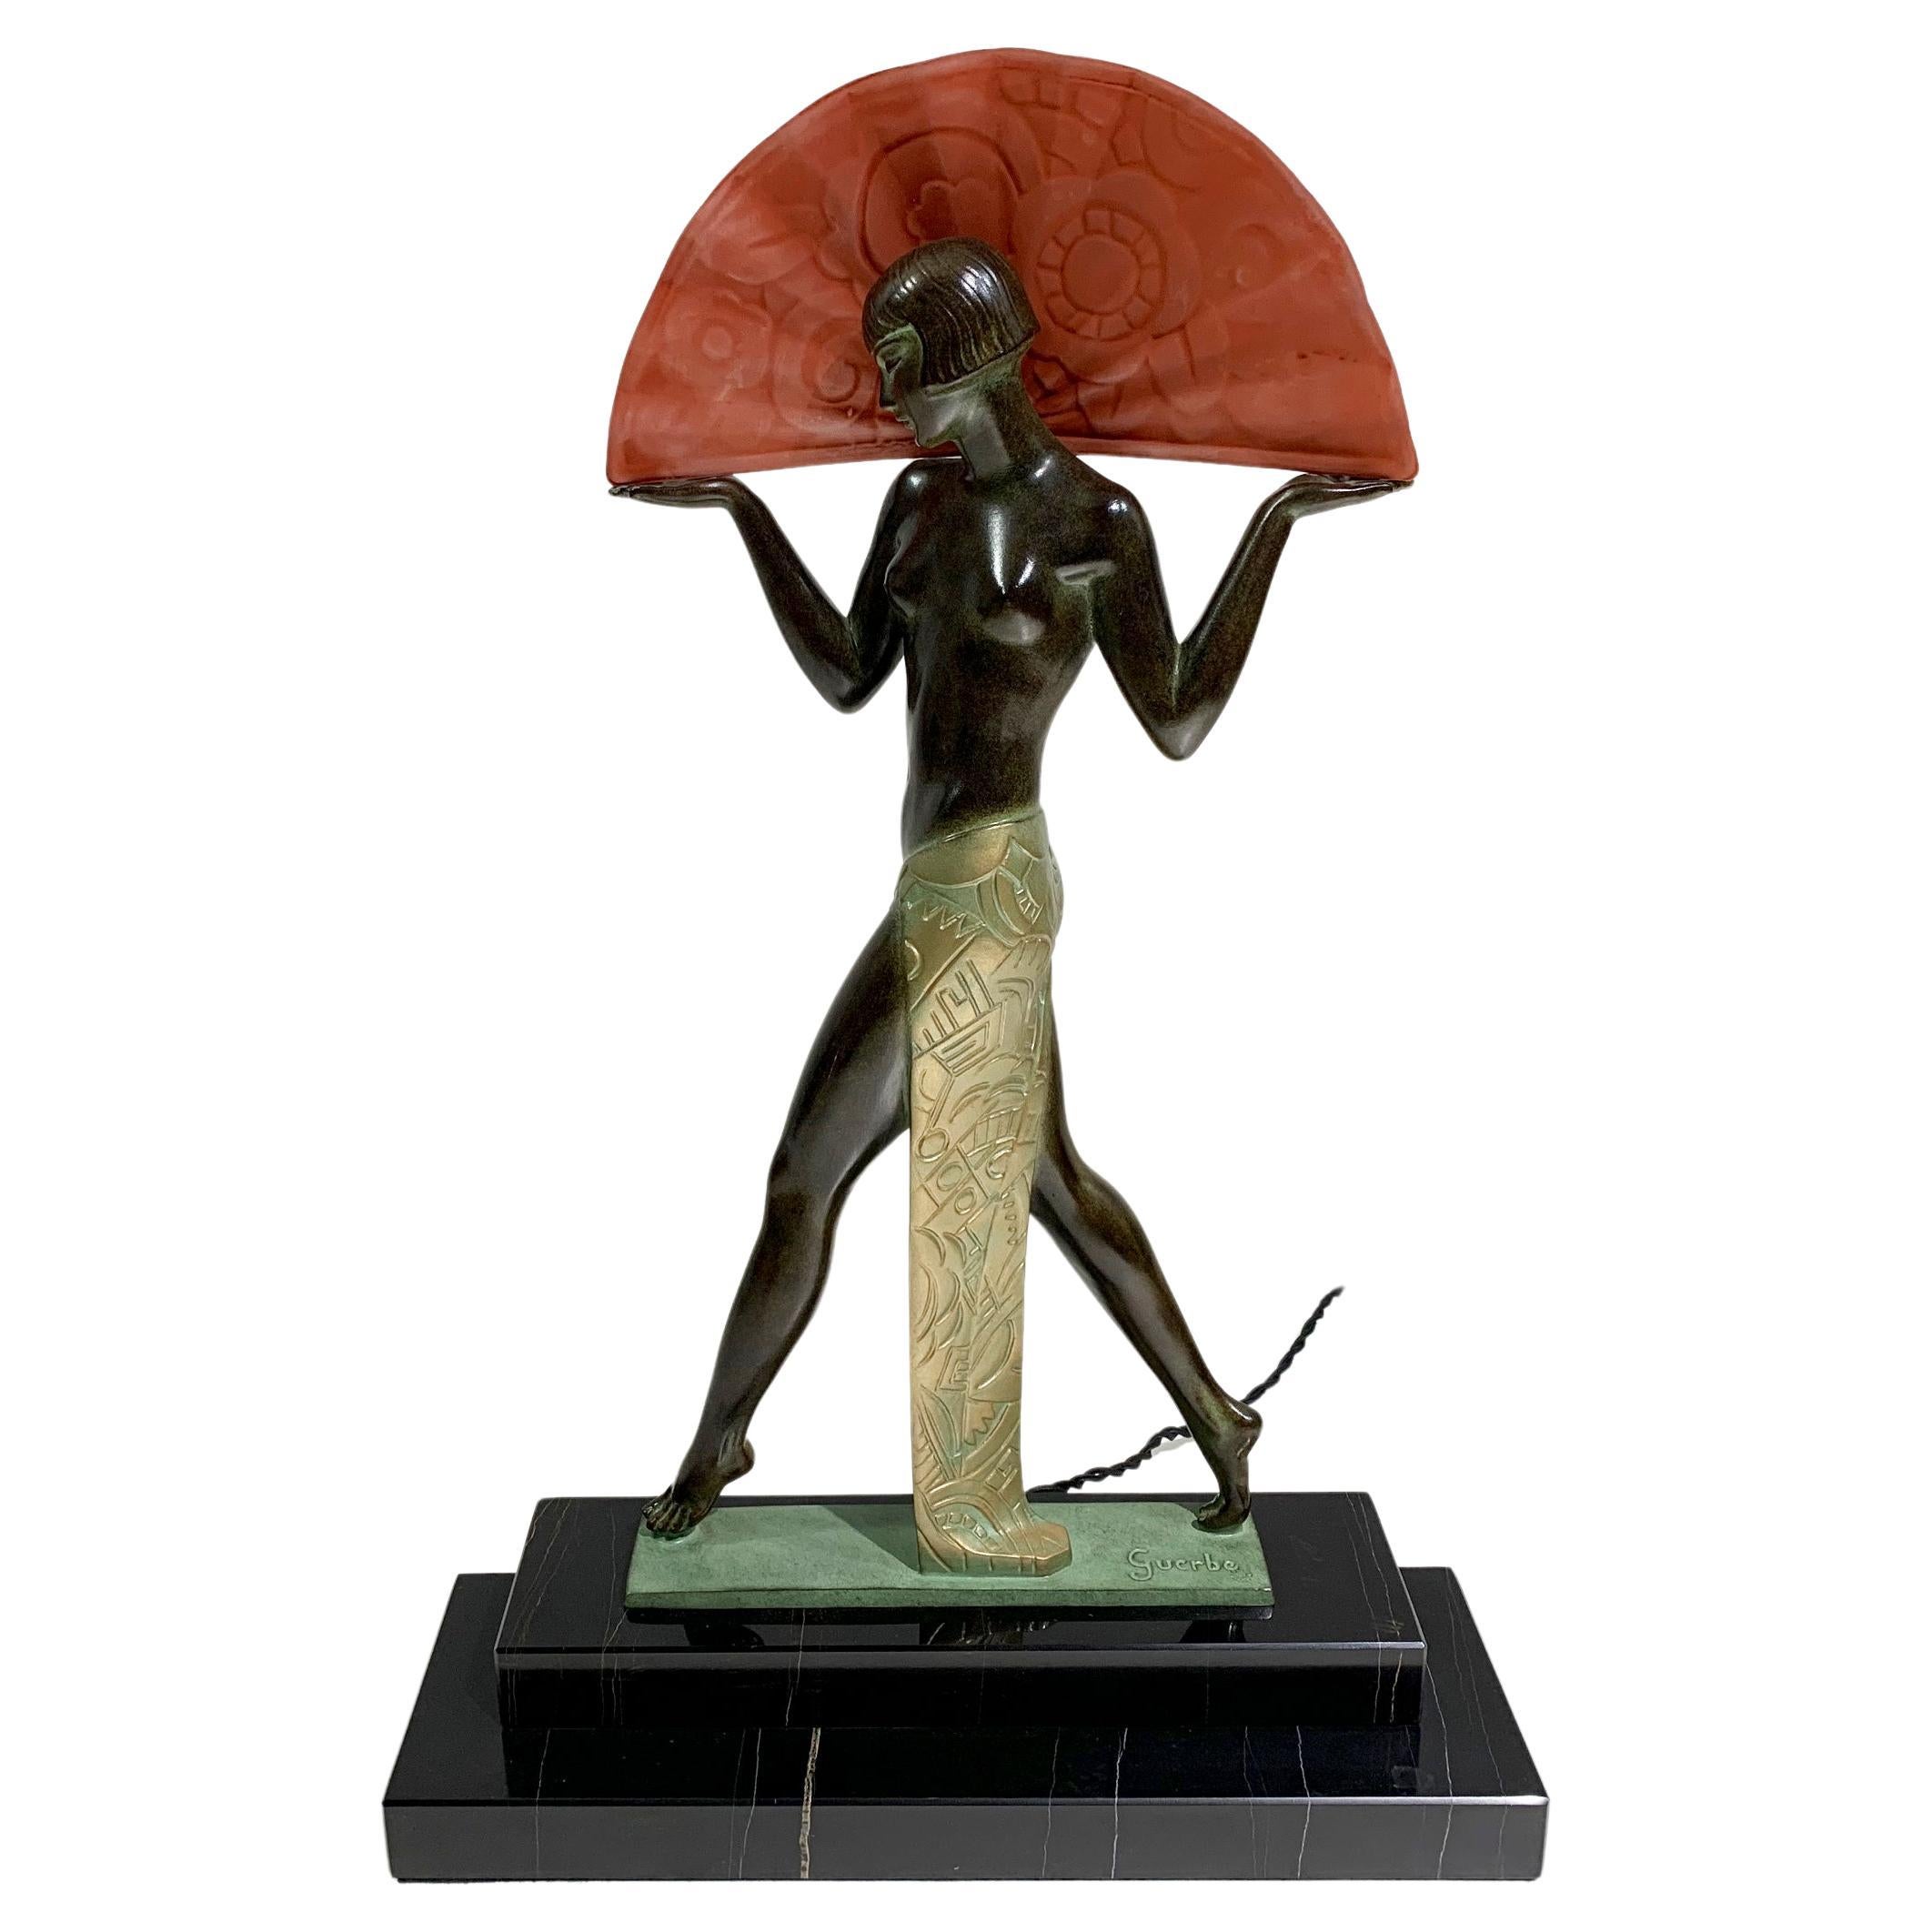 Espana Sculpture Spanish Dancer Table Lamp by Raymonde Guerbe for Max Le Verrier For Sale